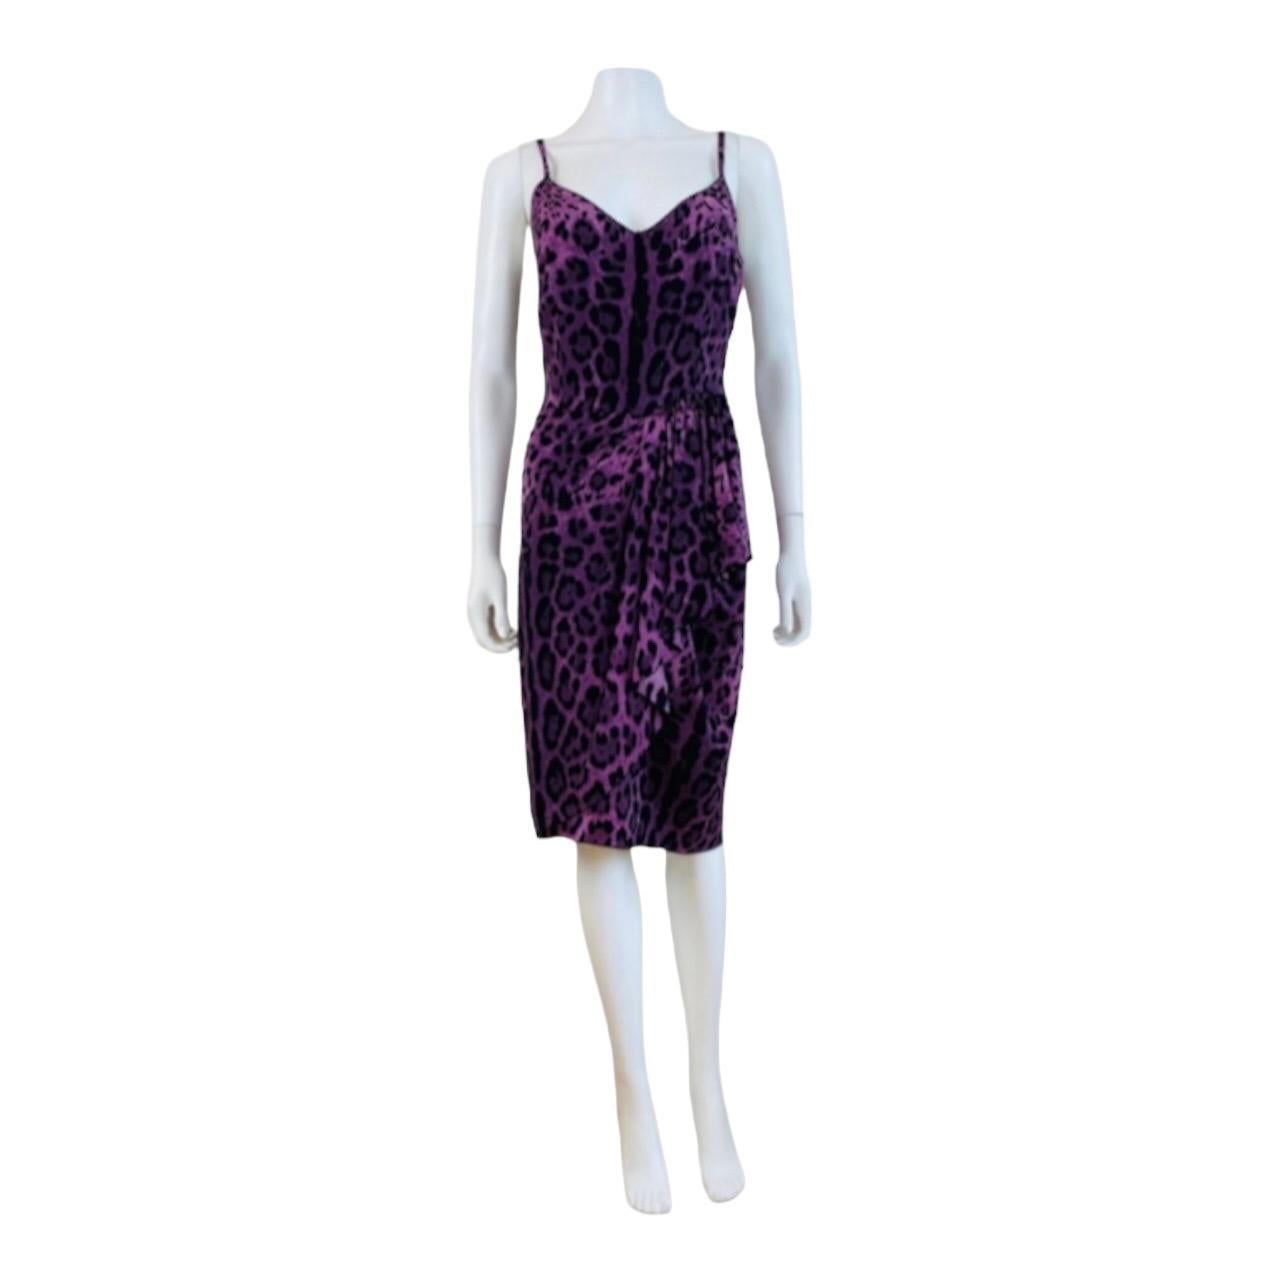 Vintage Y2K Dolce + Gabbana Dress
Purple + black leopard print silk + elastane fabric
Sleeveless style
Thin shoulder straps
Fitted bust with V neckline
Fitted waist with draped hip swag on the left hip
Knee length/midi length tapered skirt
Hidden